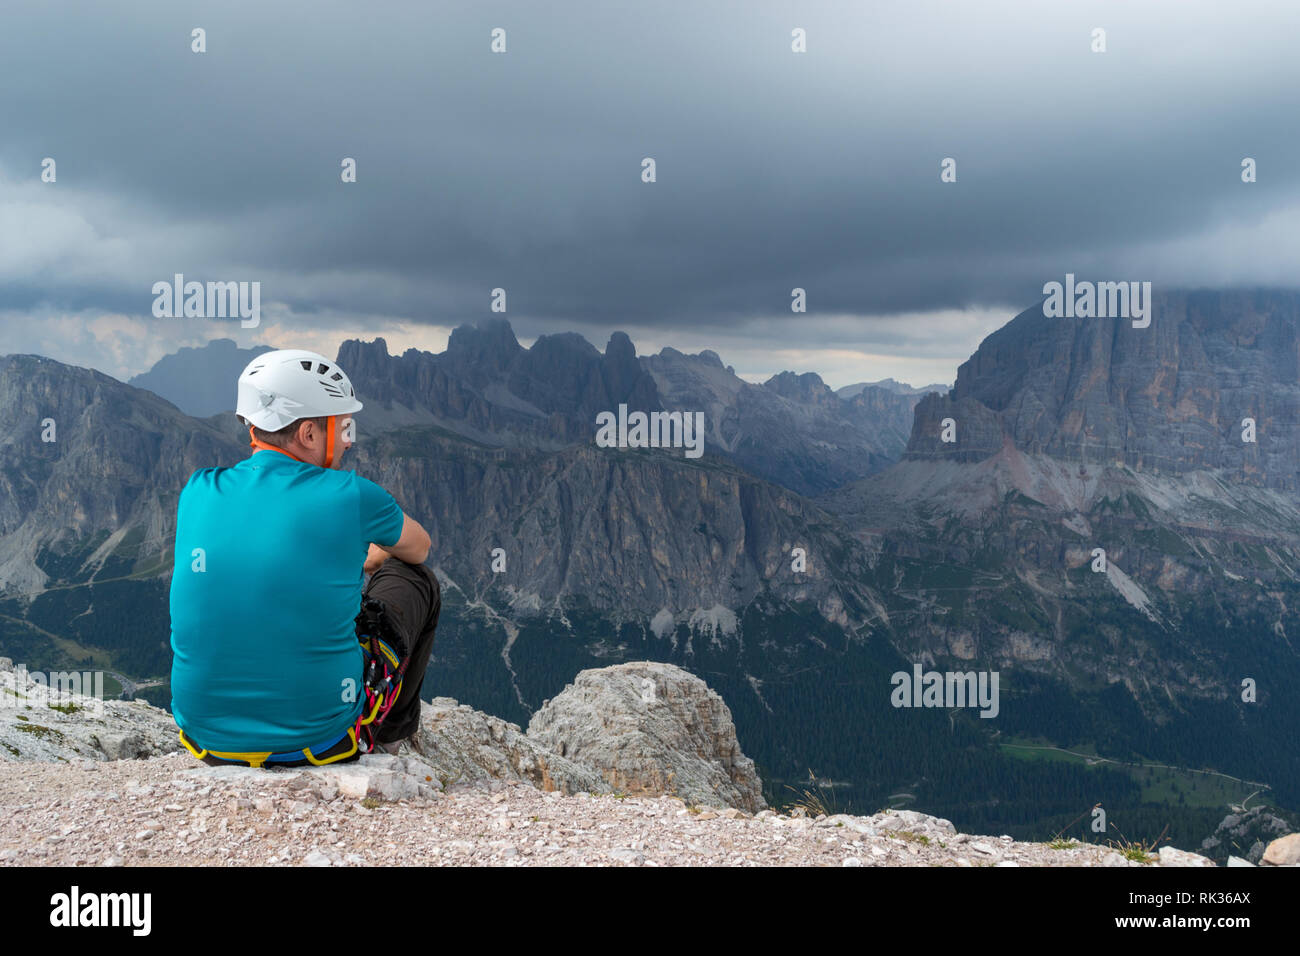 A man pausing after a via ferrata climb on top of Averau mountain peak, in Dolomites, Italy, gazing at the incoming storm clouds Stock Photo